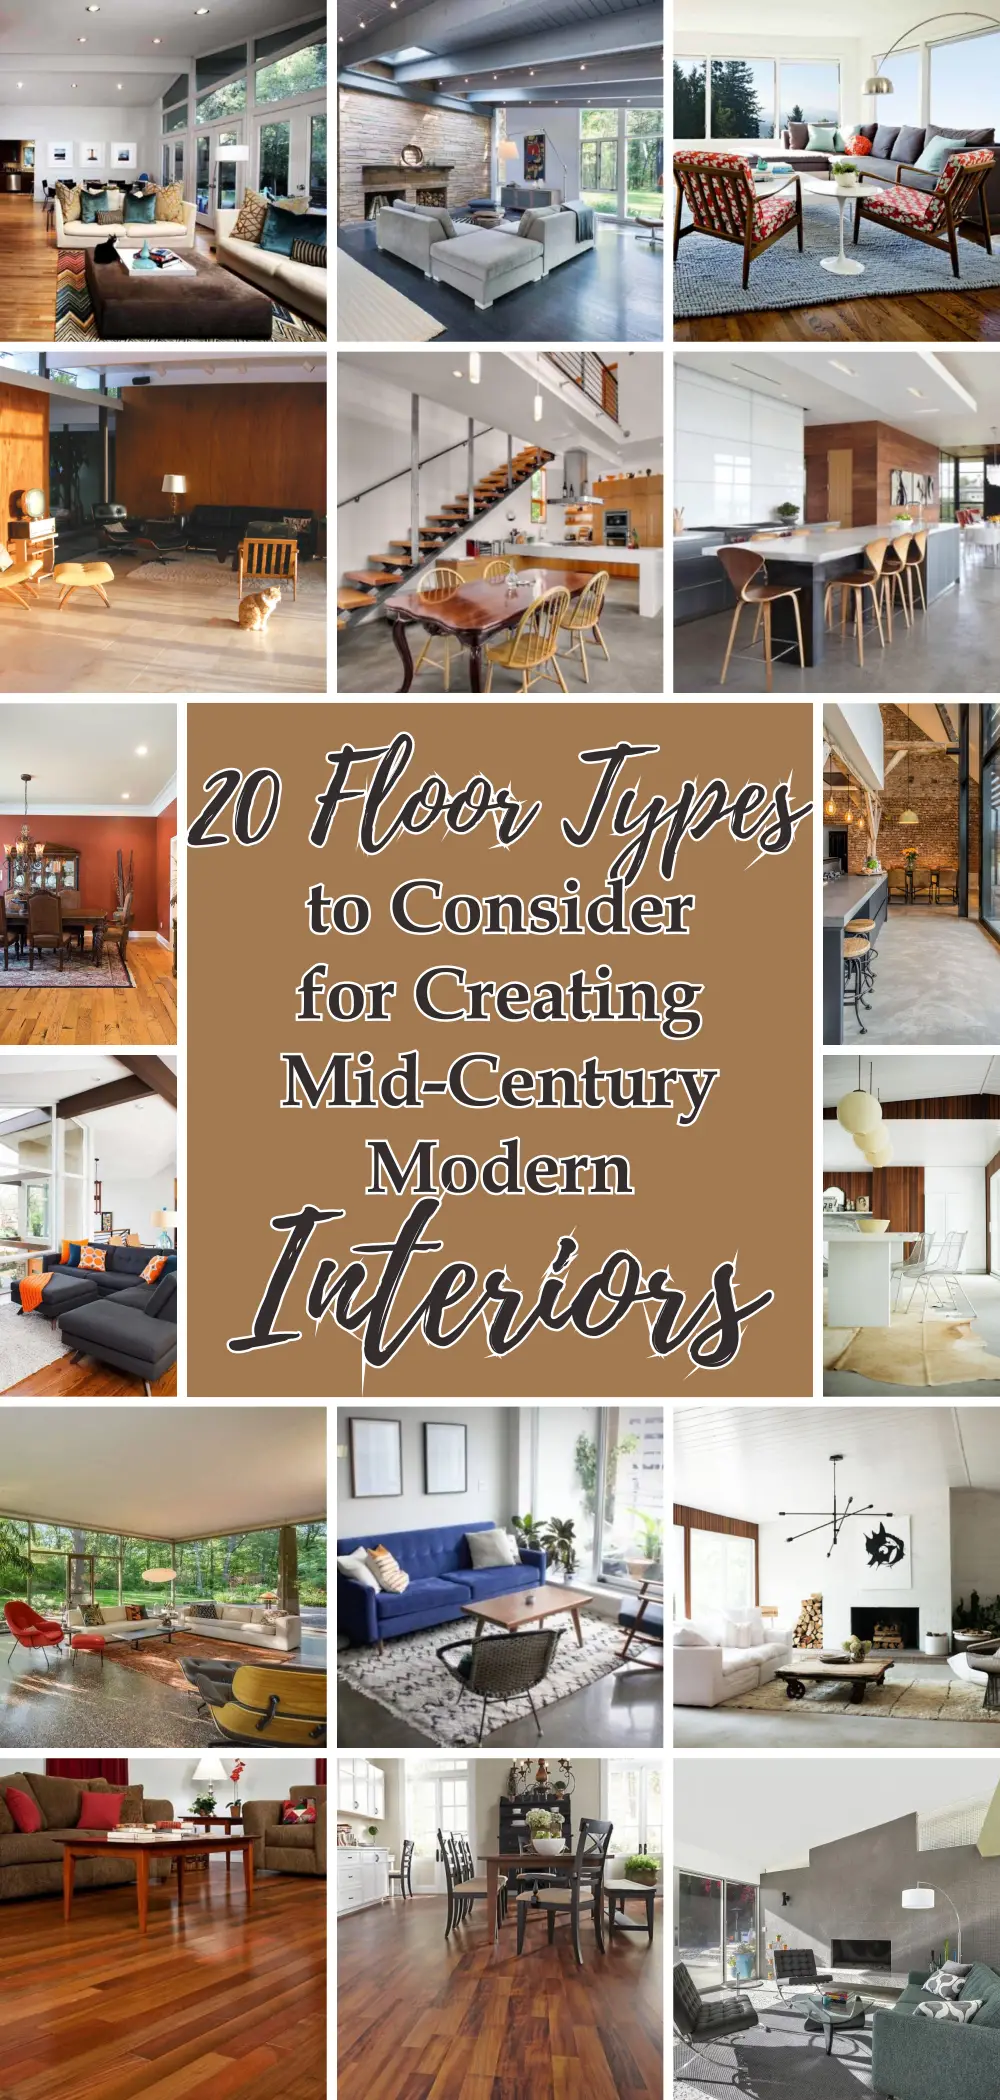 20 Floor Types to Consider for Creating Mid Century Modern ...